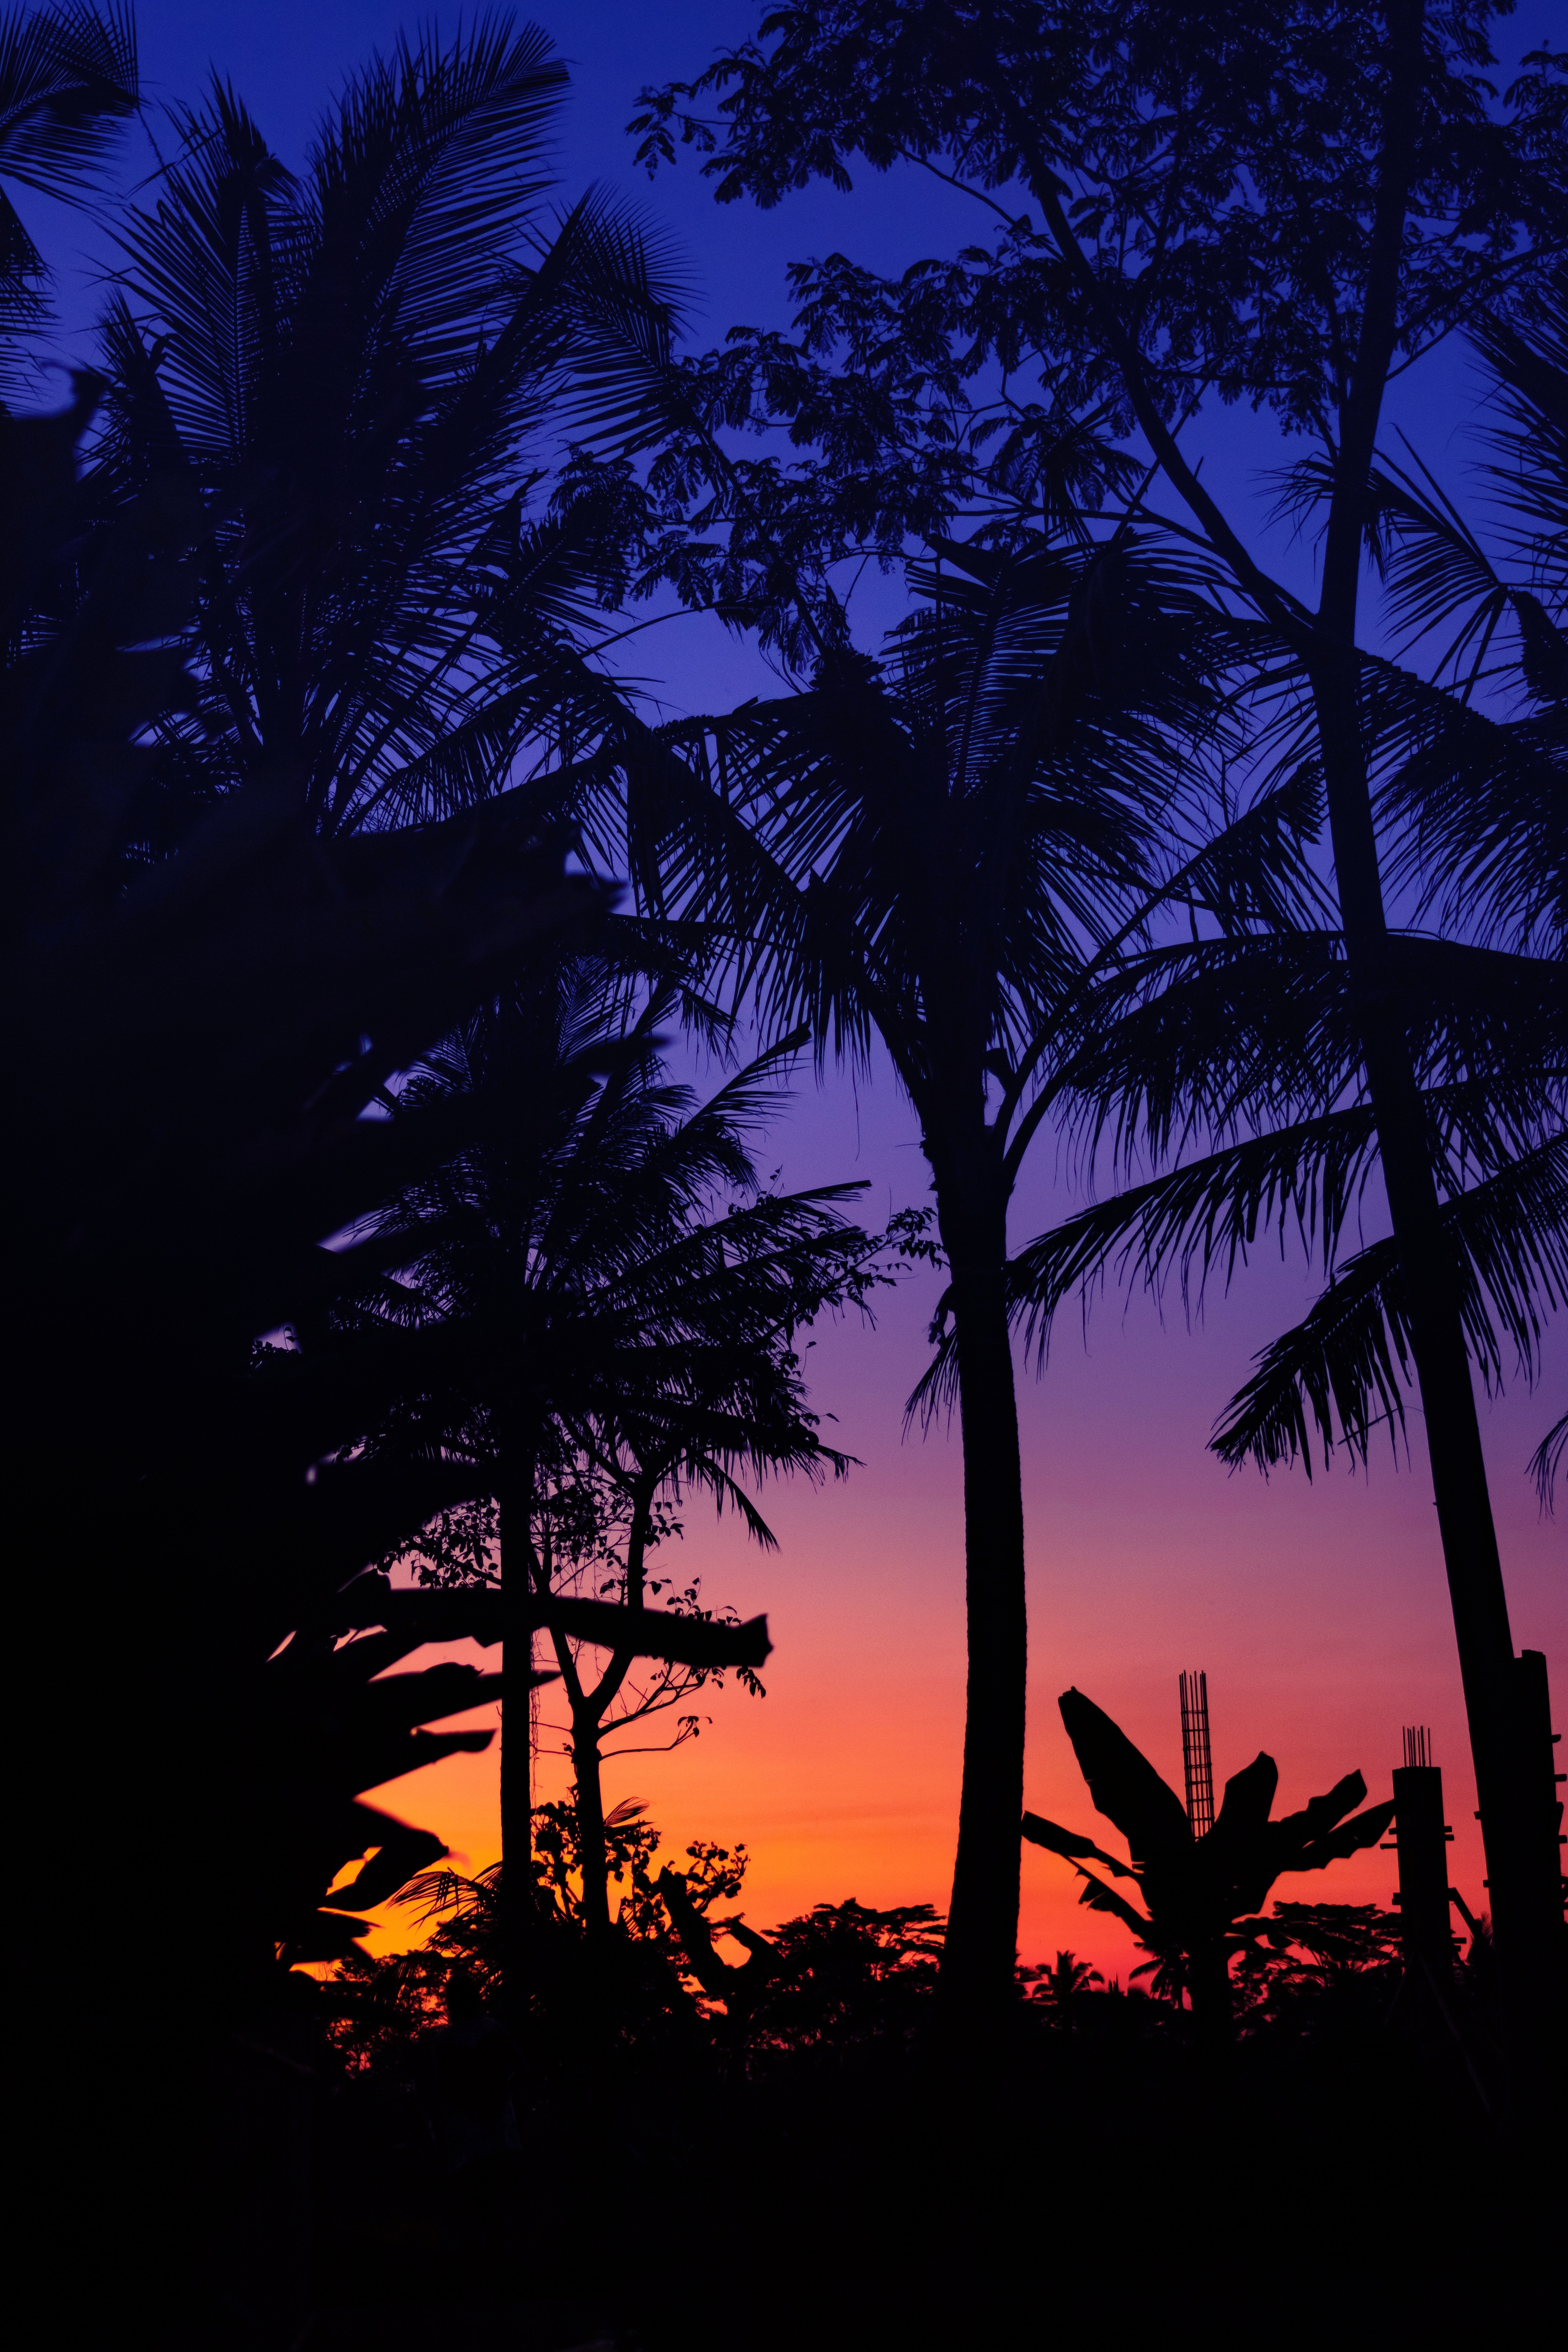 145591 download wallpaper dark, sunset, twilight, palms, silhouettes, dusk screensavers and pictures for free